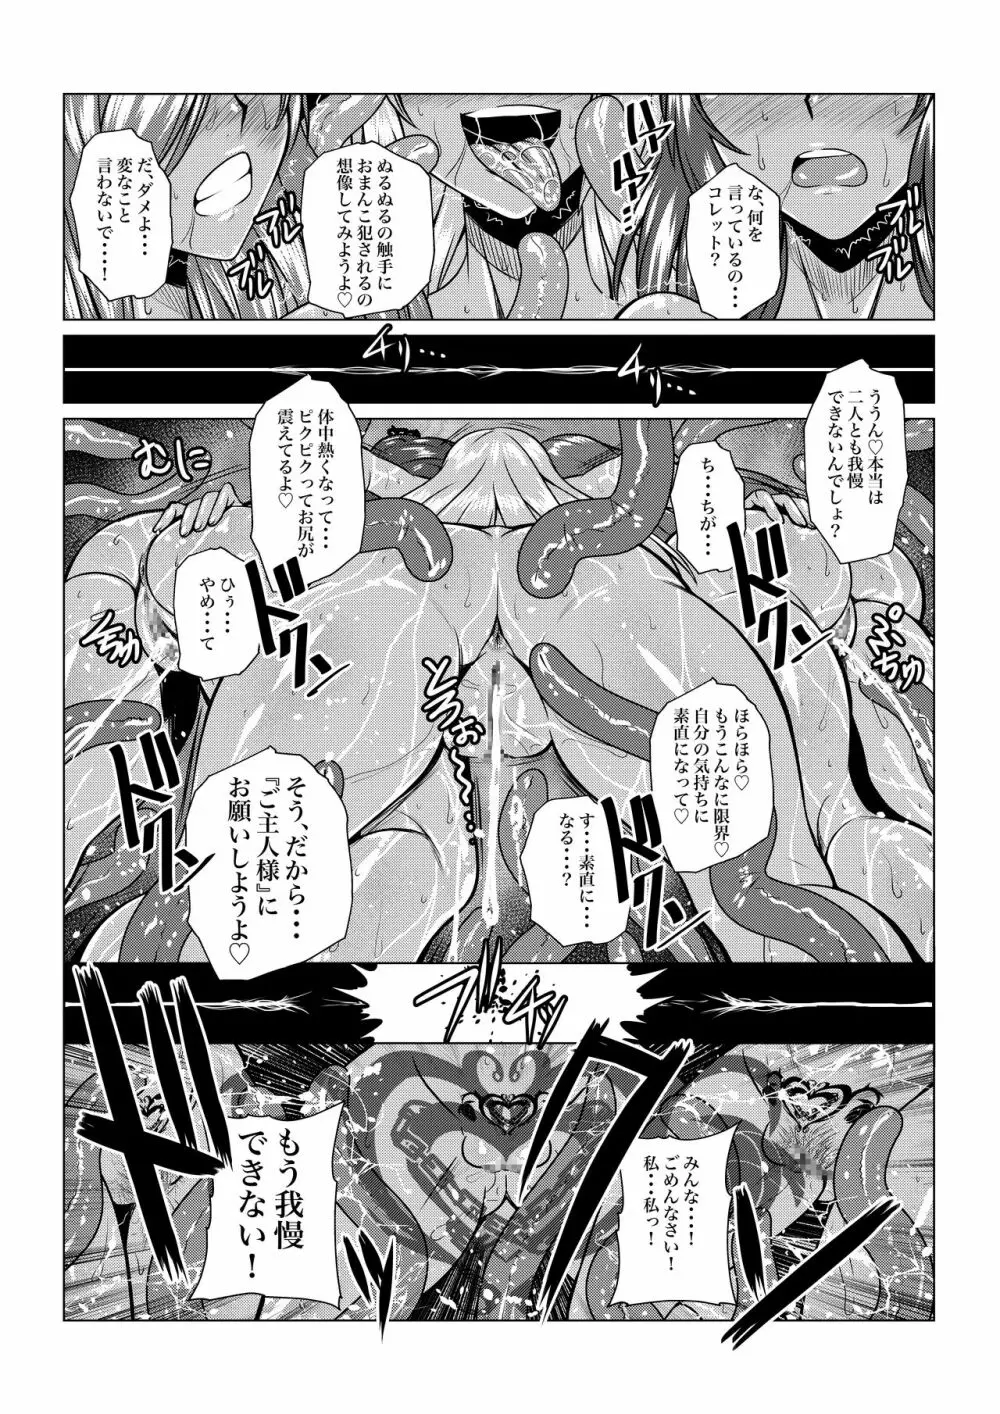 Tales Of DarkSide〜三散華〜 - page14